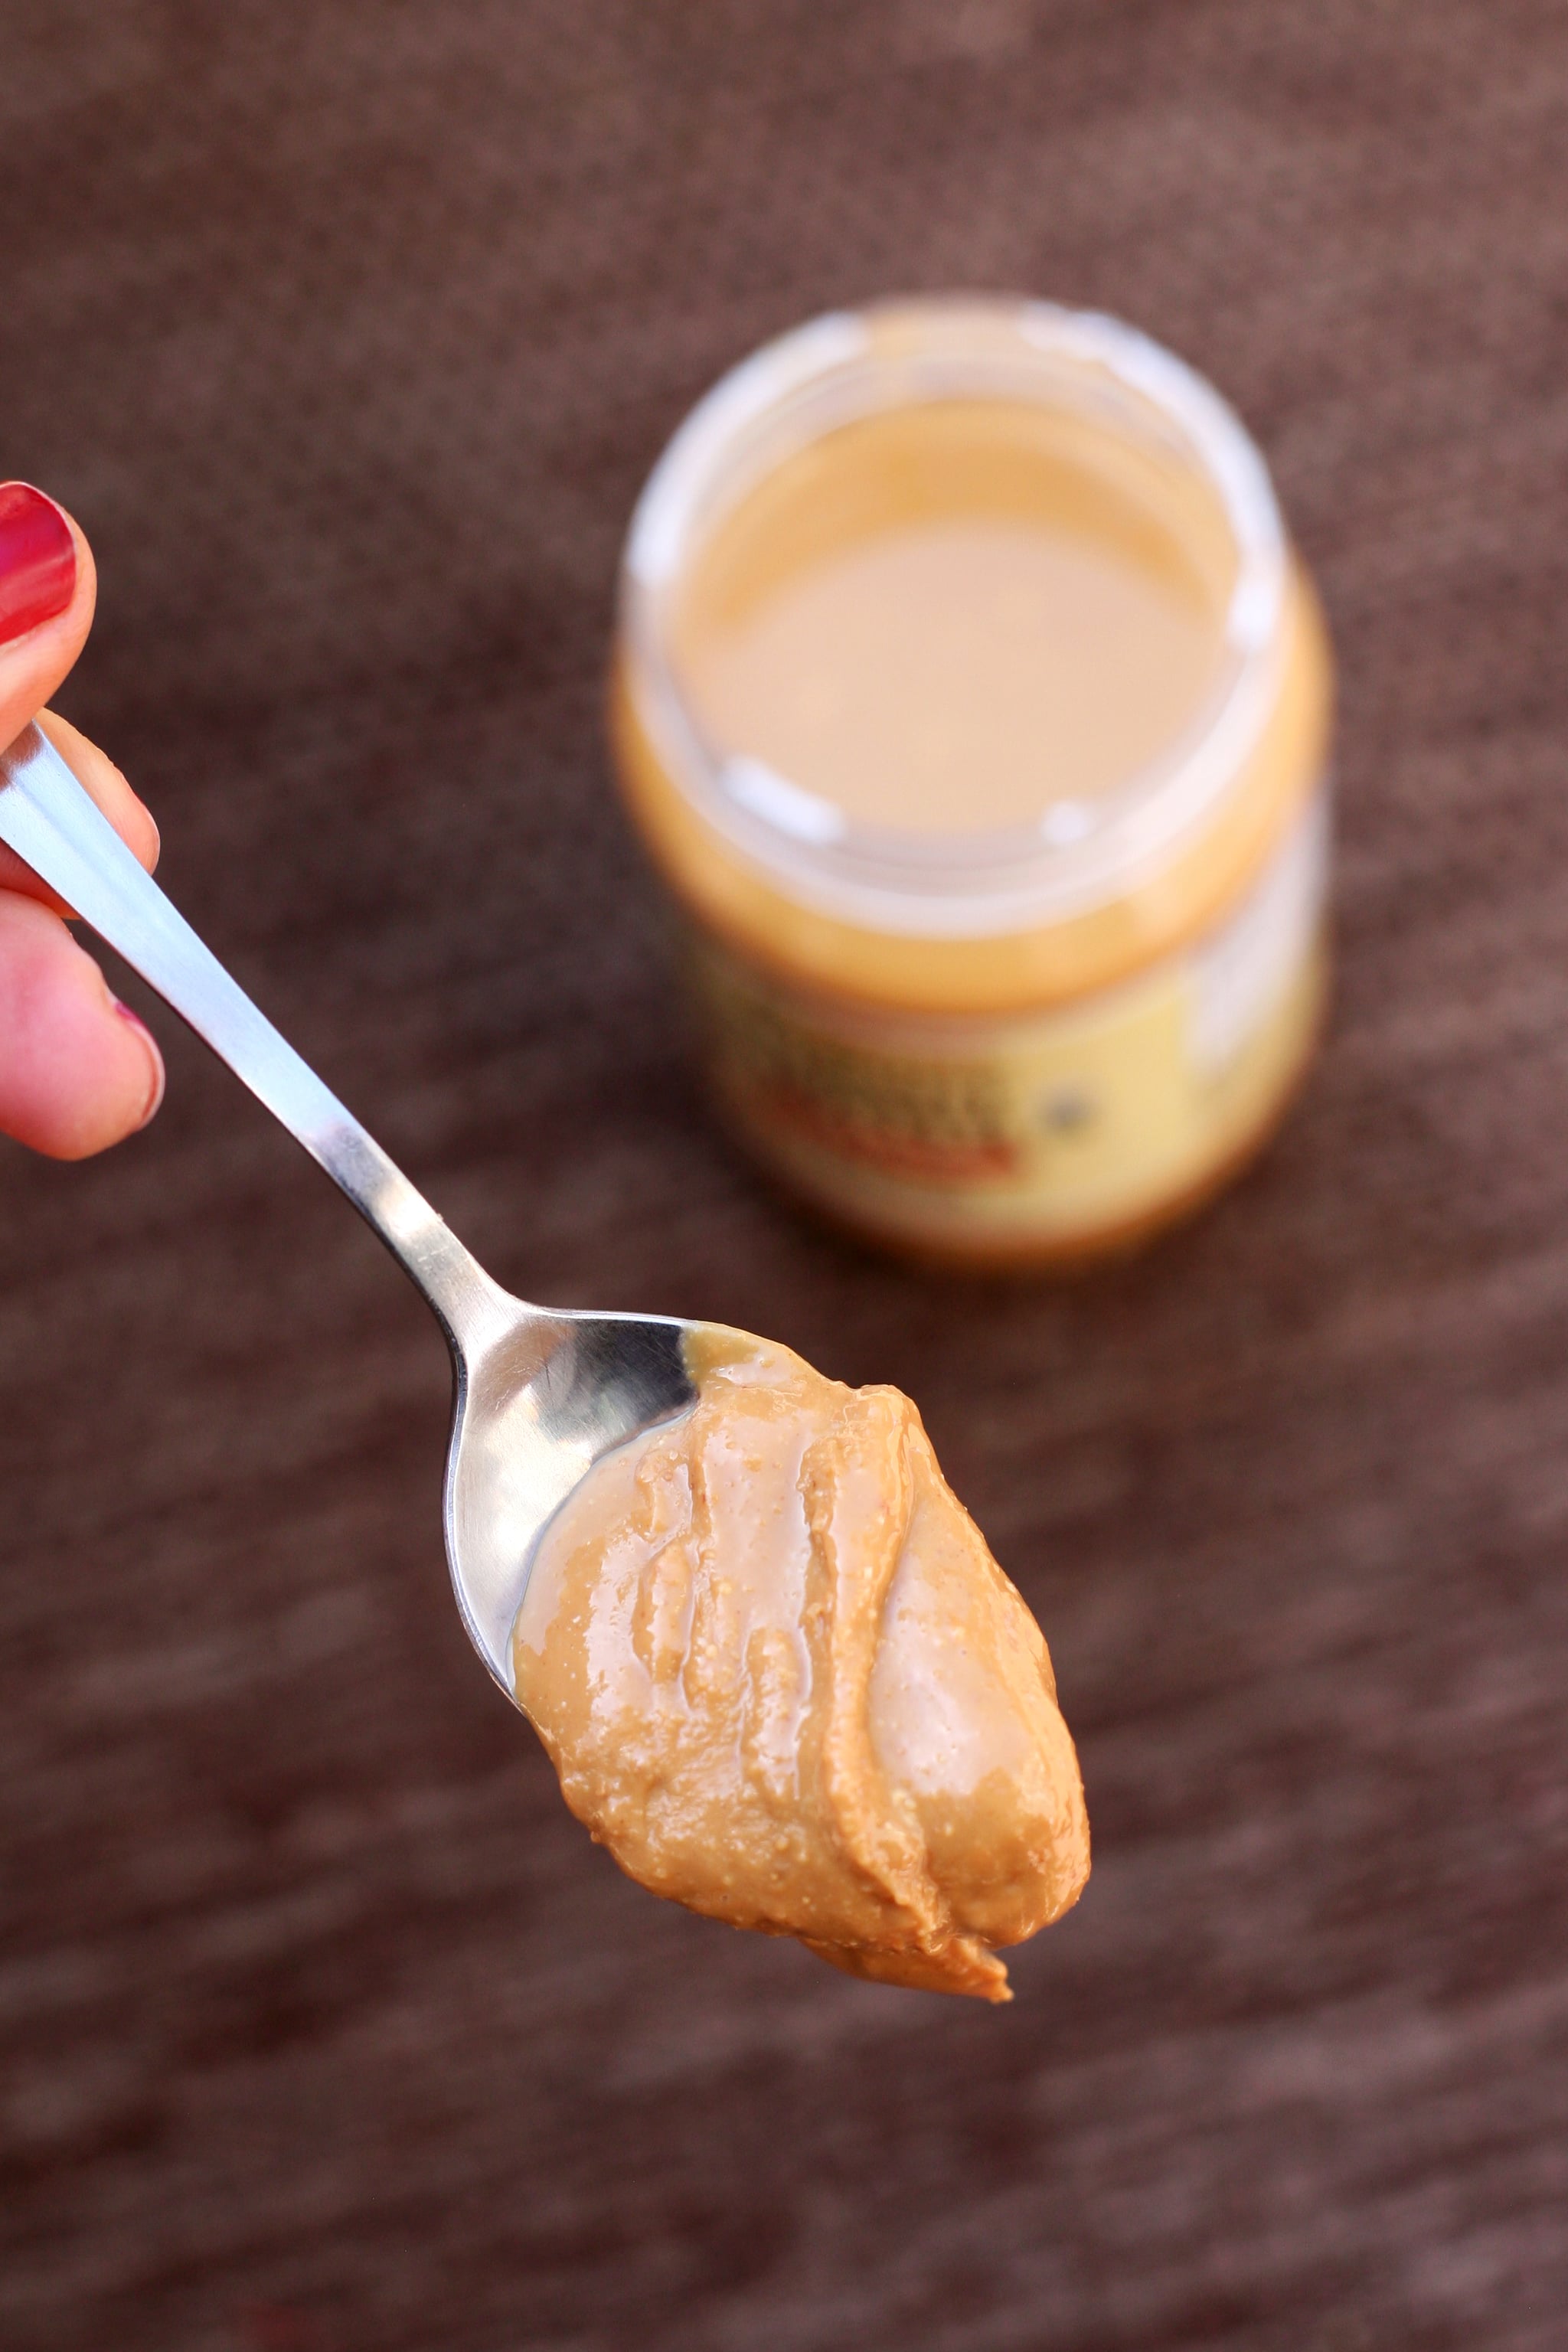 Is Peanut Butter Good For Weight Loss? | POPSUGAR Fitness